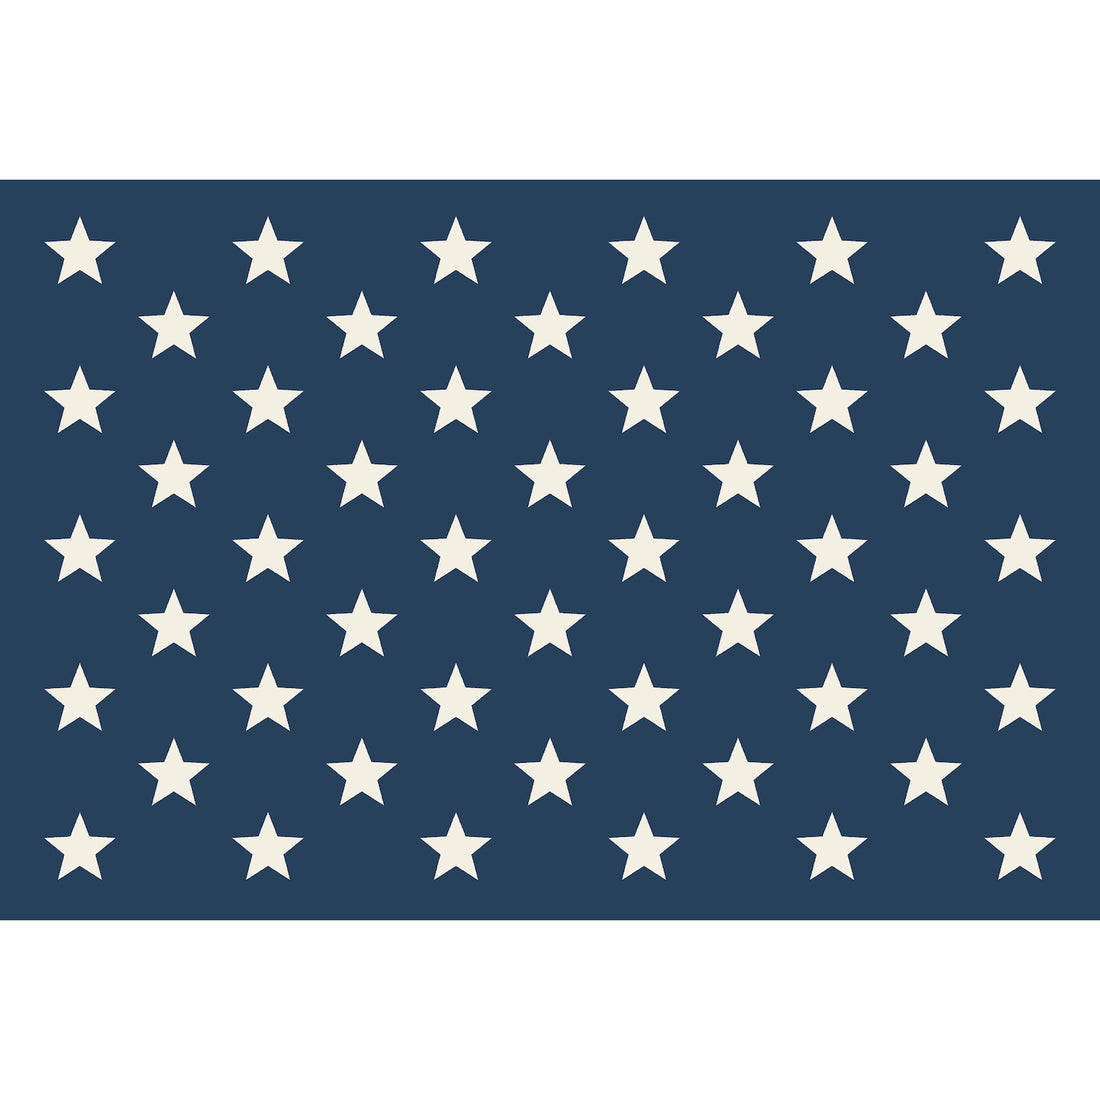 A solid navy blue background containing fifty evenly-spaced white stars; a design identical to the canton of the United States flag. 